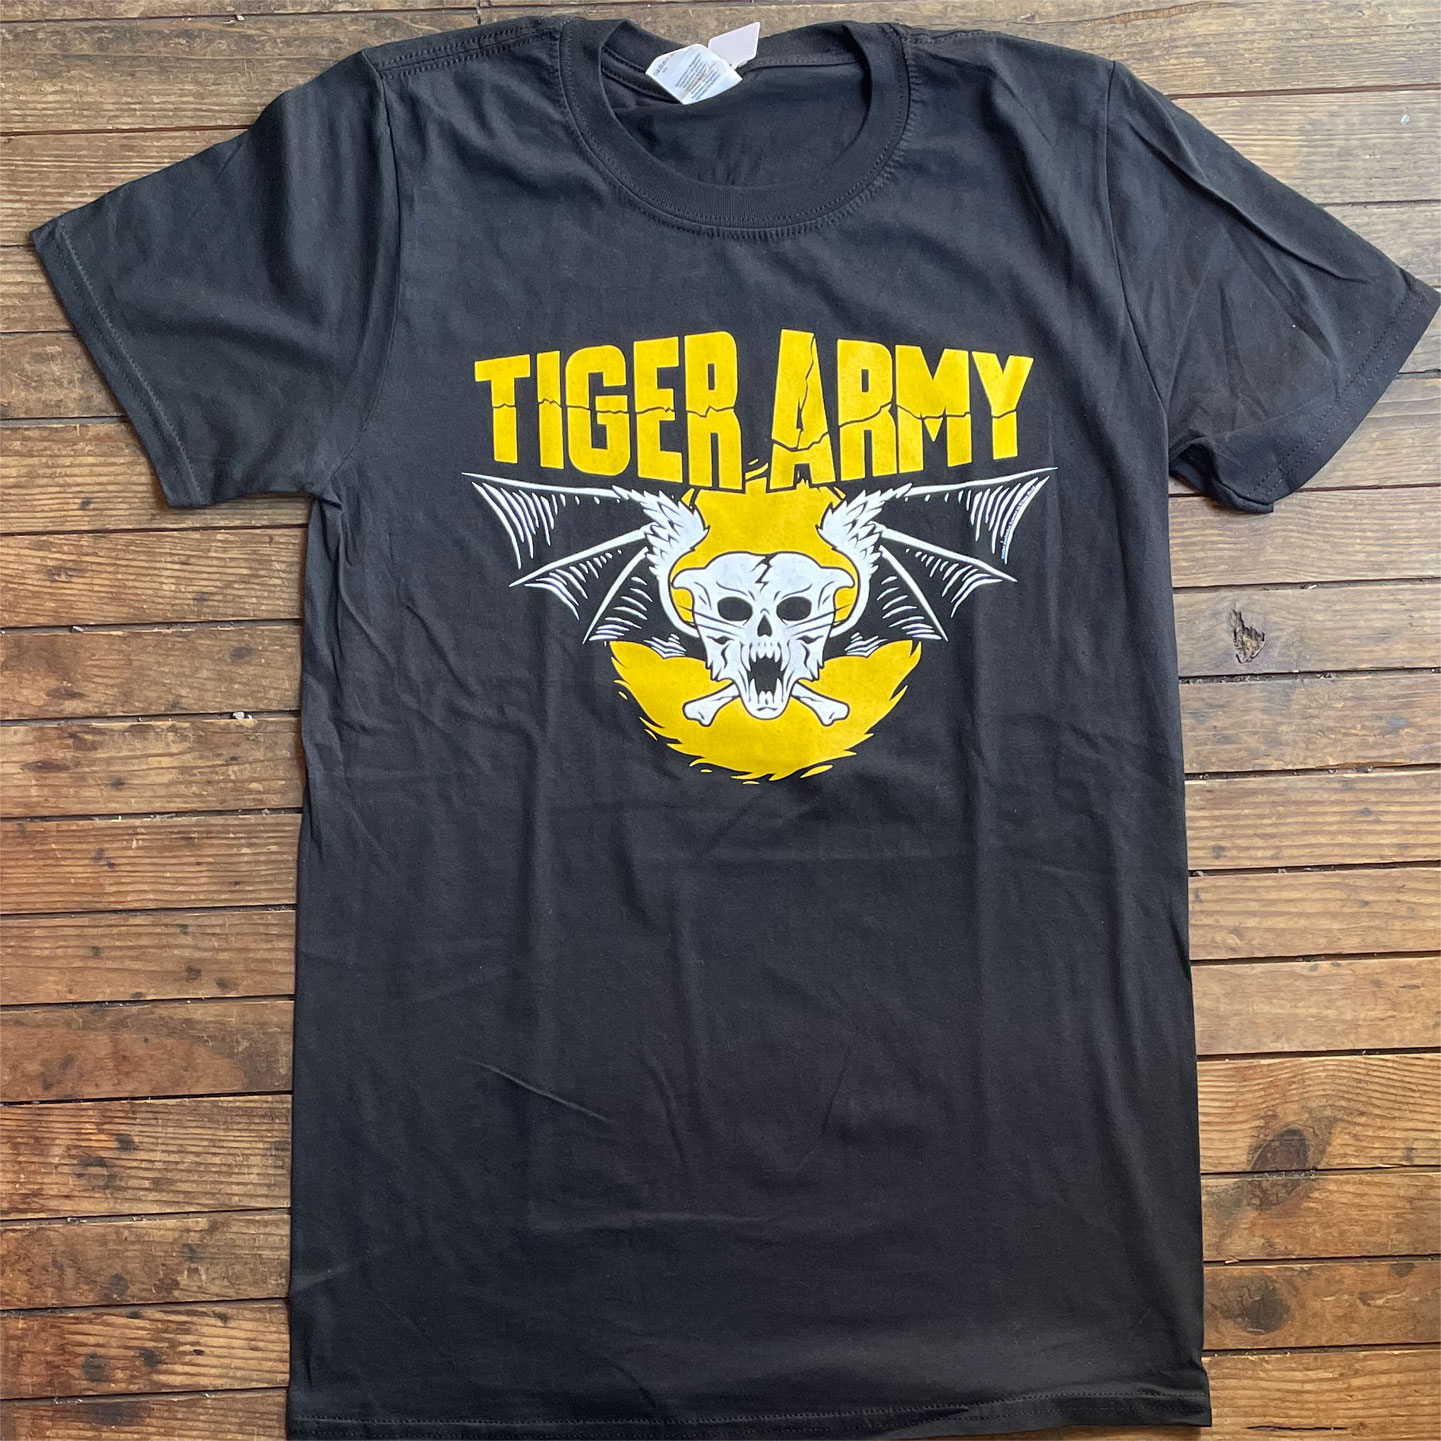 TIGER ARMY Tシャツ 1